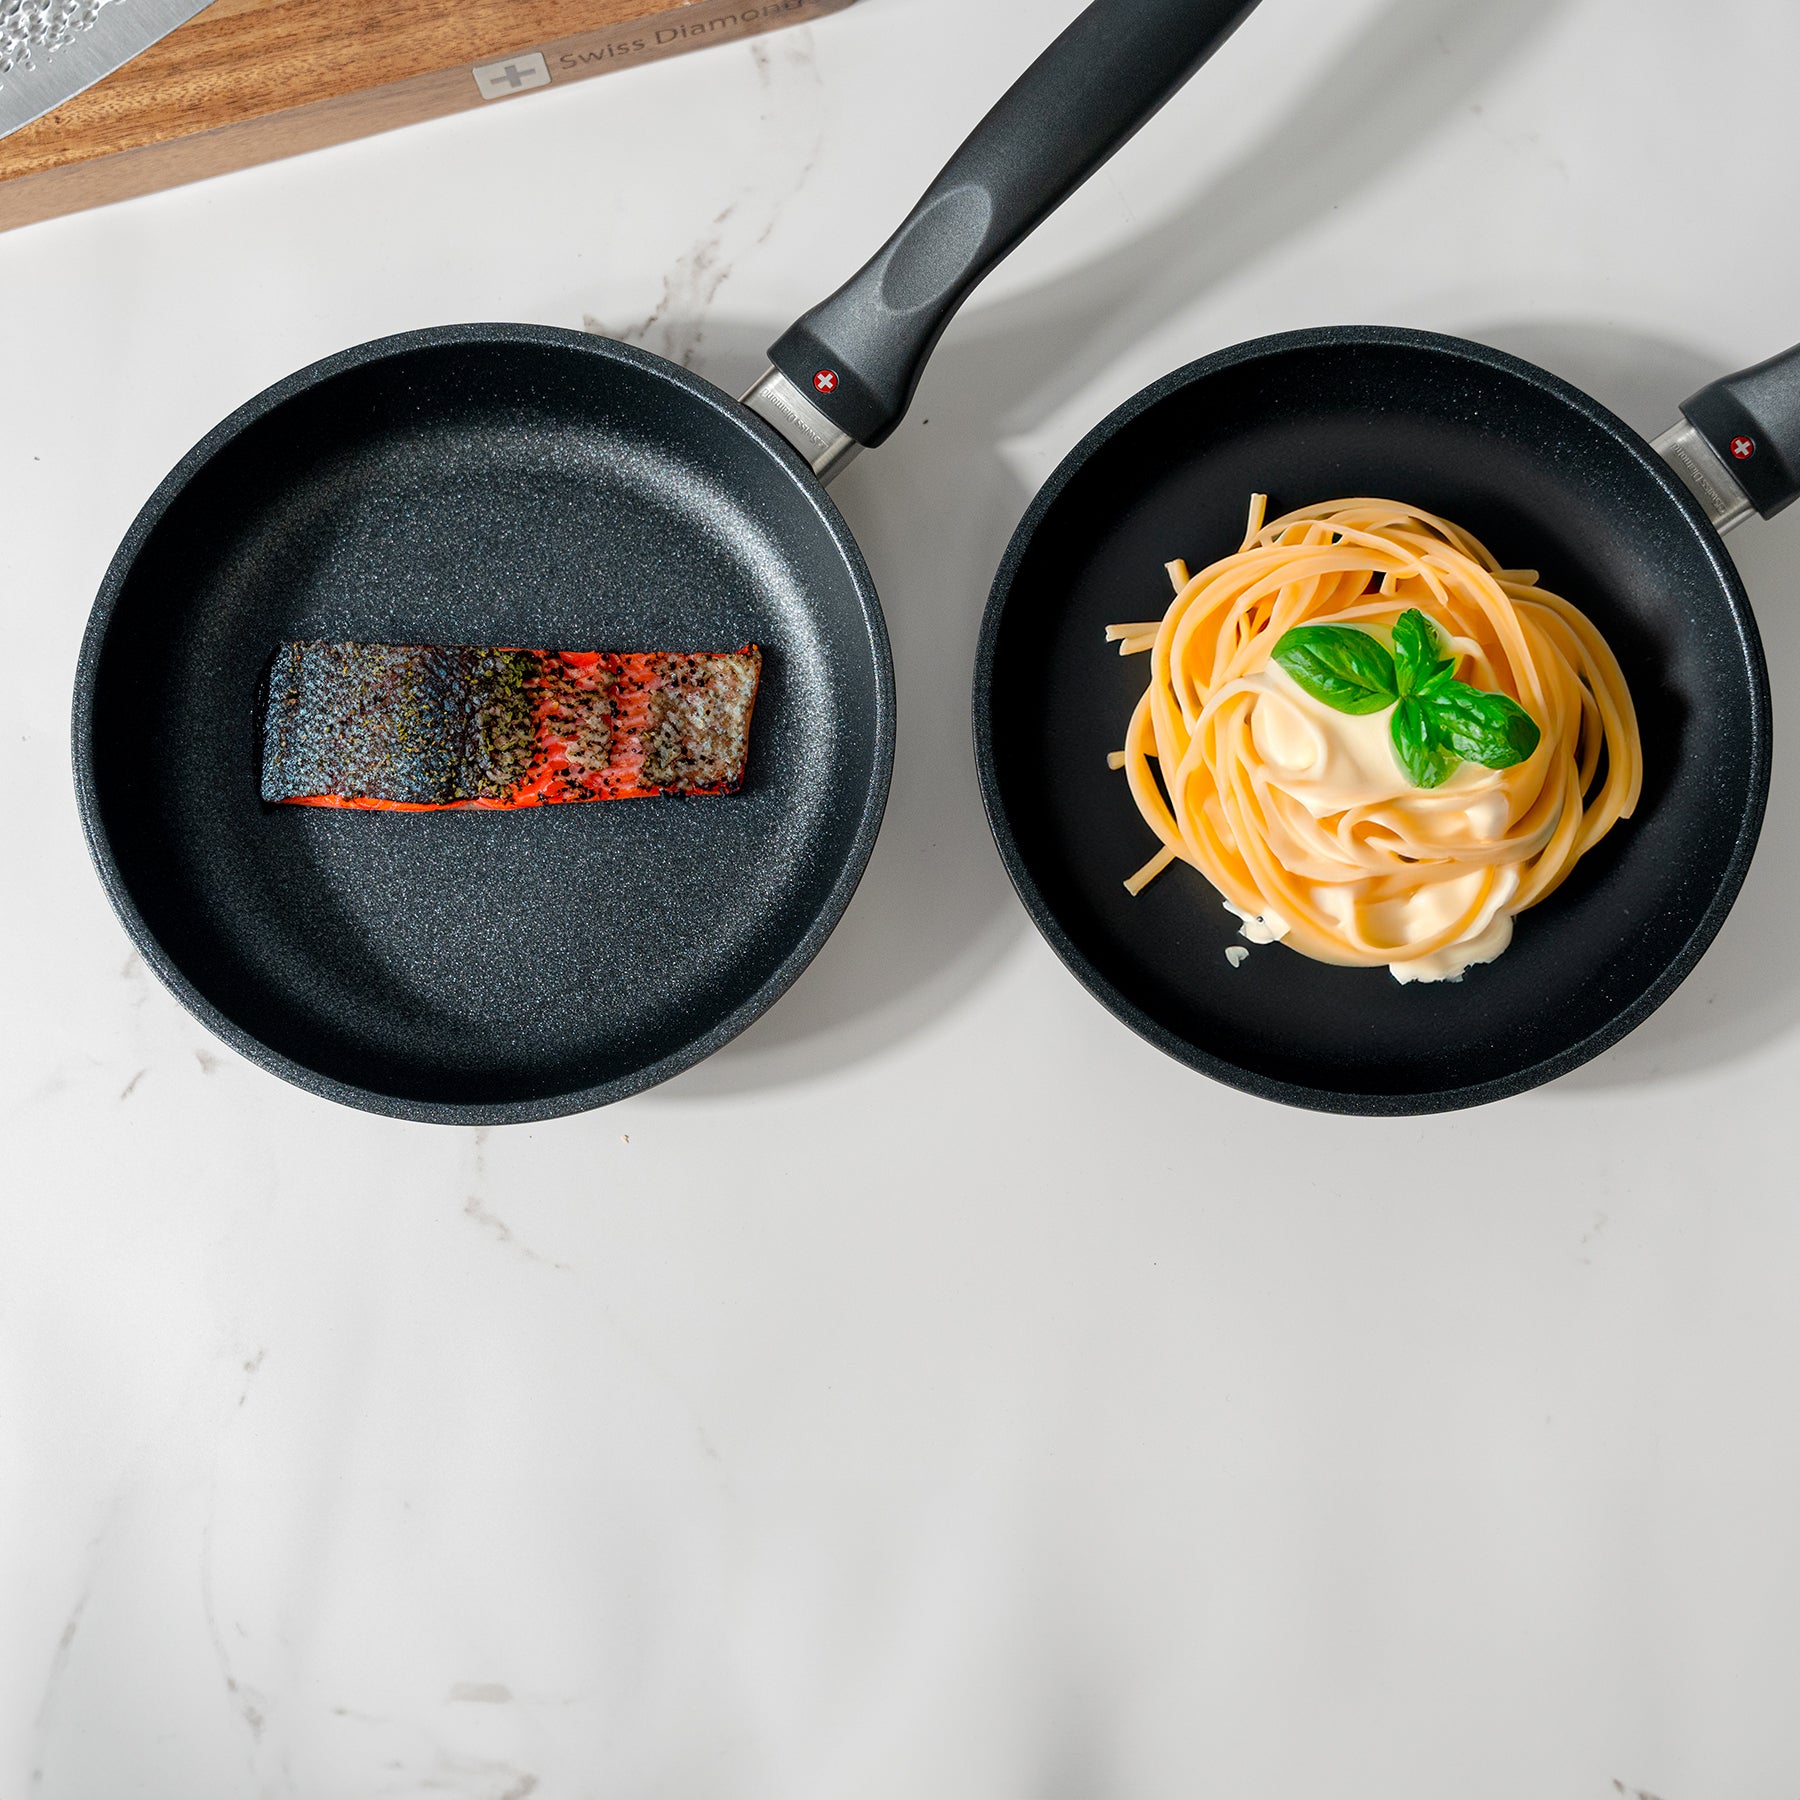 XD Nonstick 2-Piece 8" Fry Pan Set on kitchen counter with food inside pan